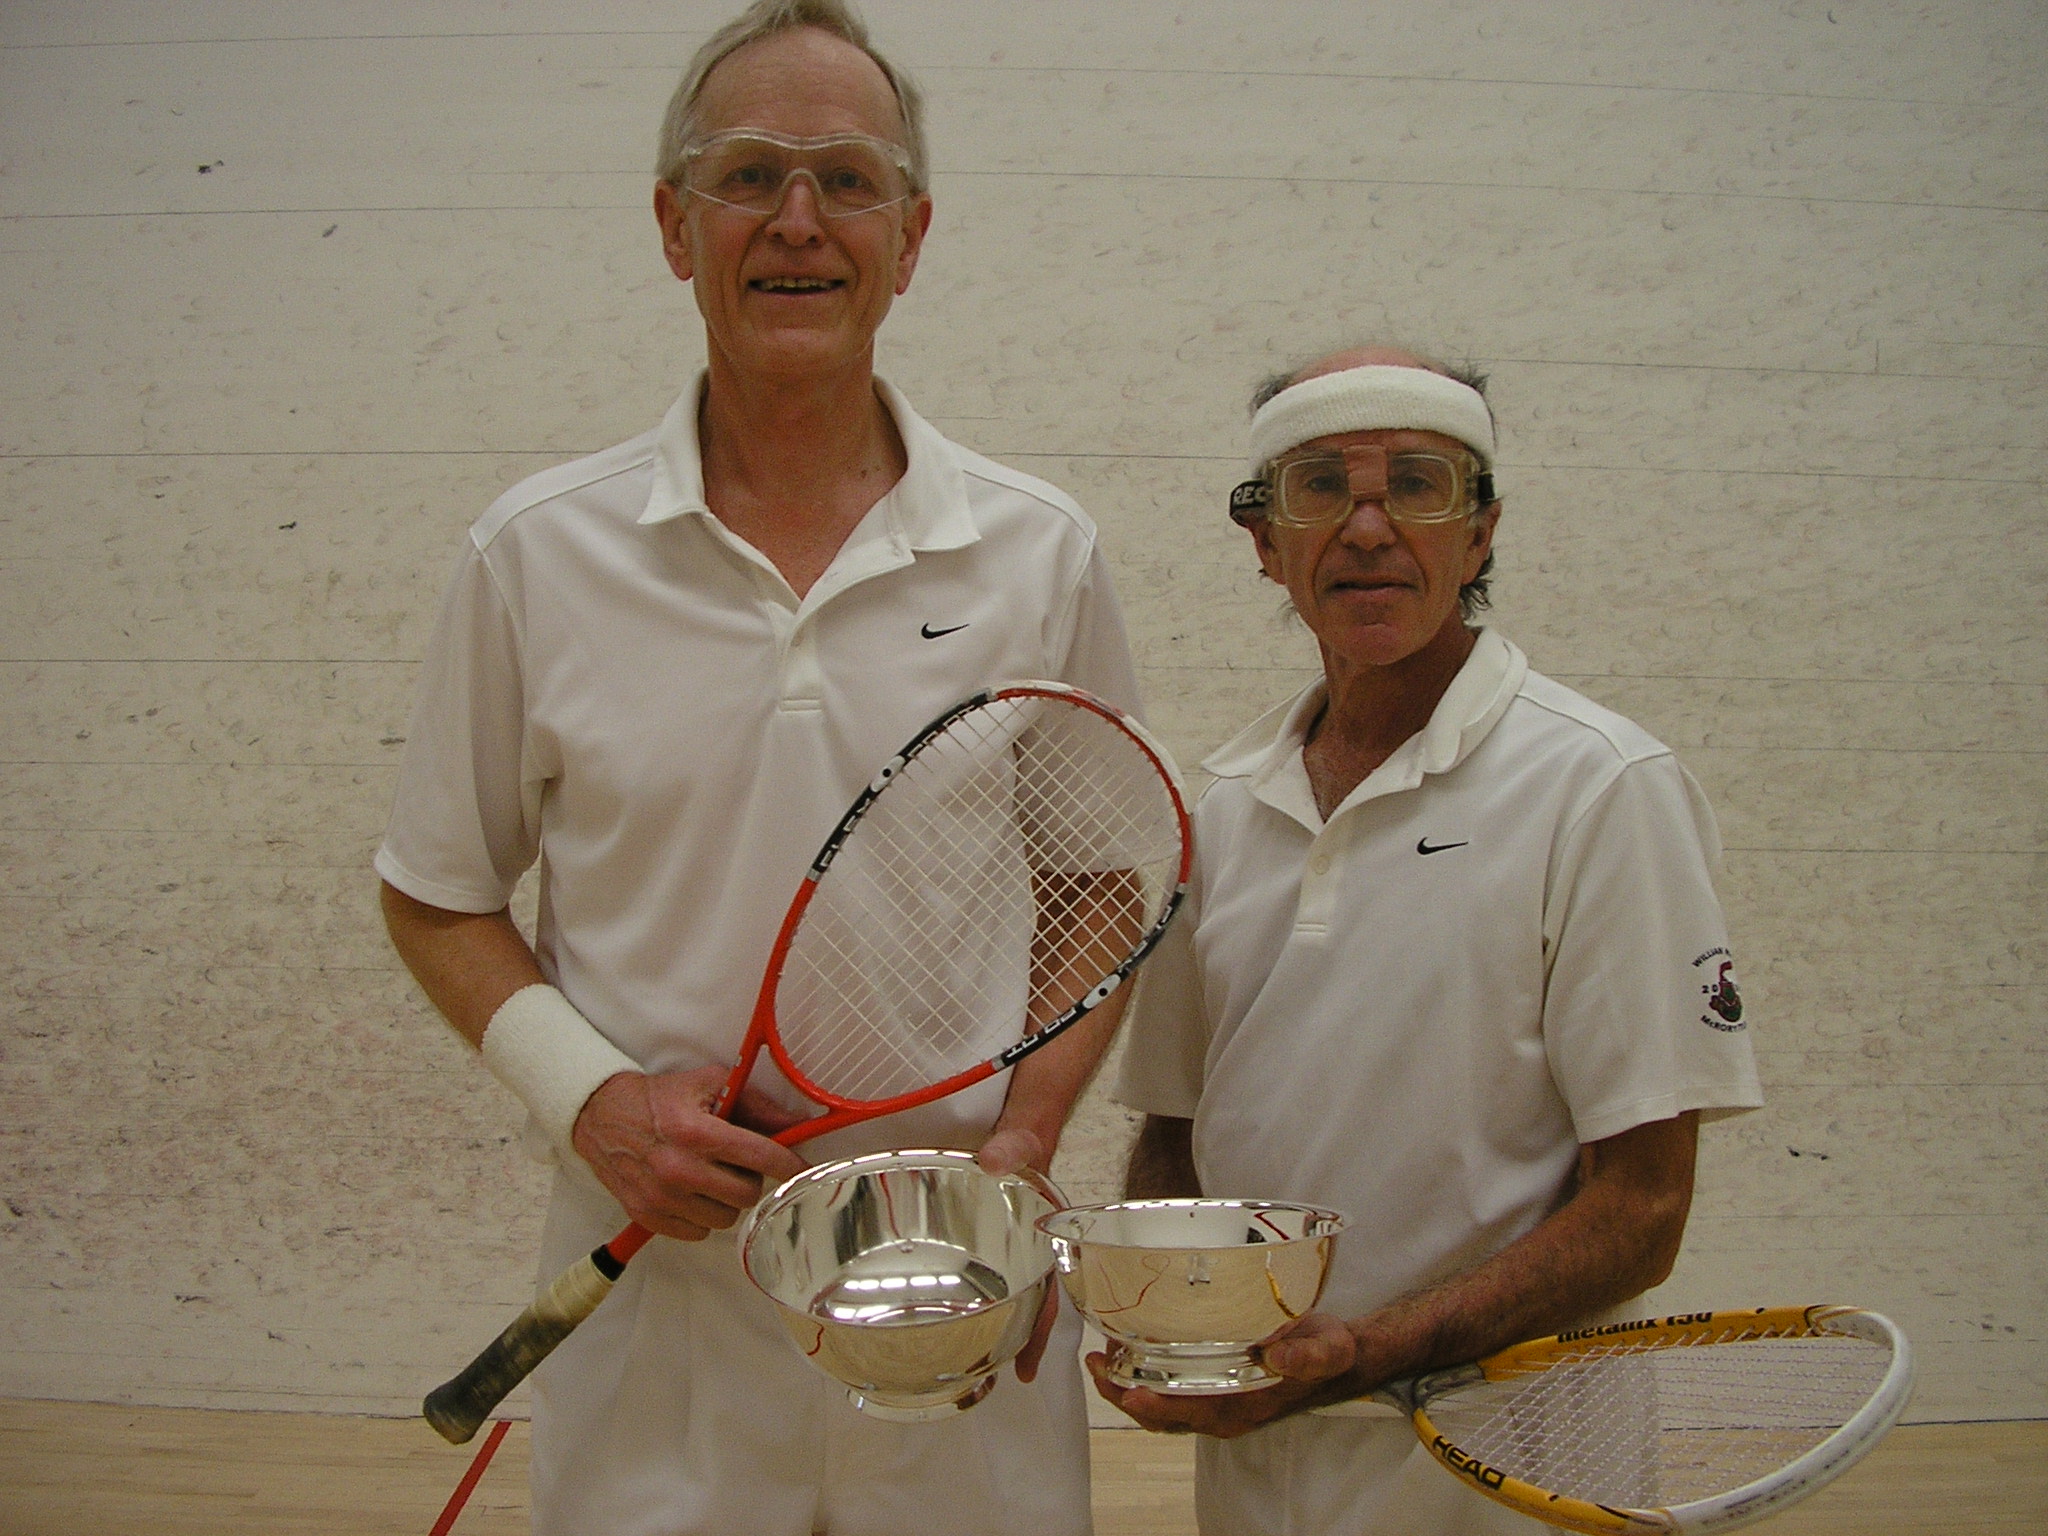 Jim Zug defeated Henry Steinglass in the M65 final.